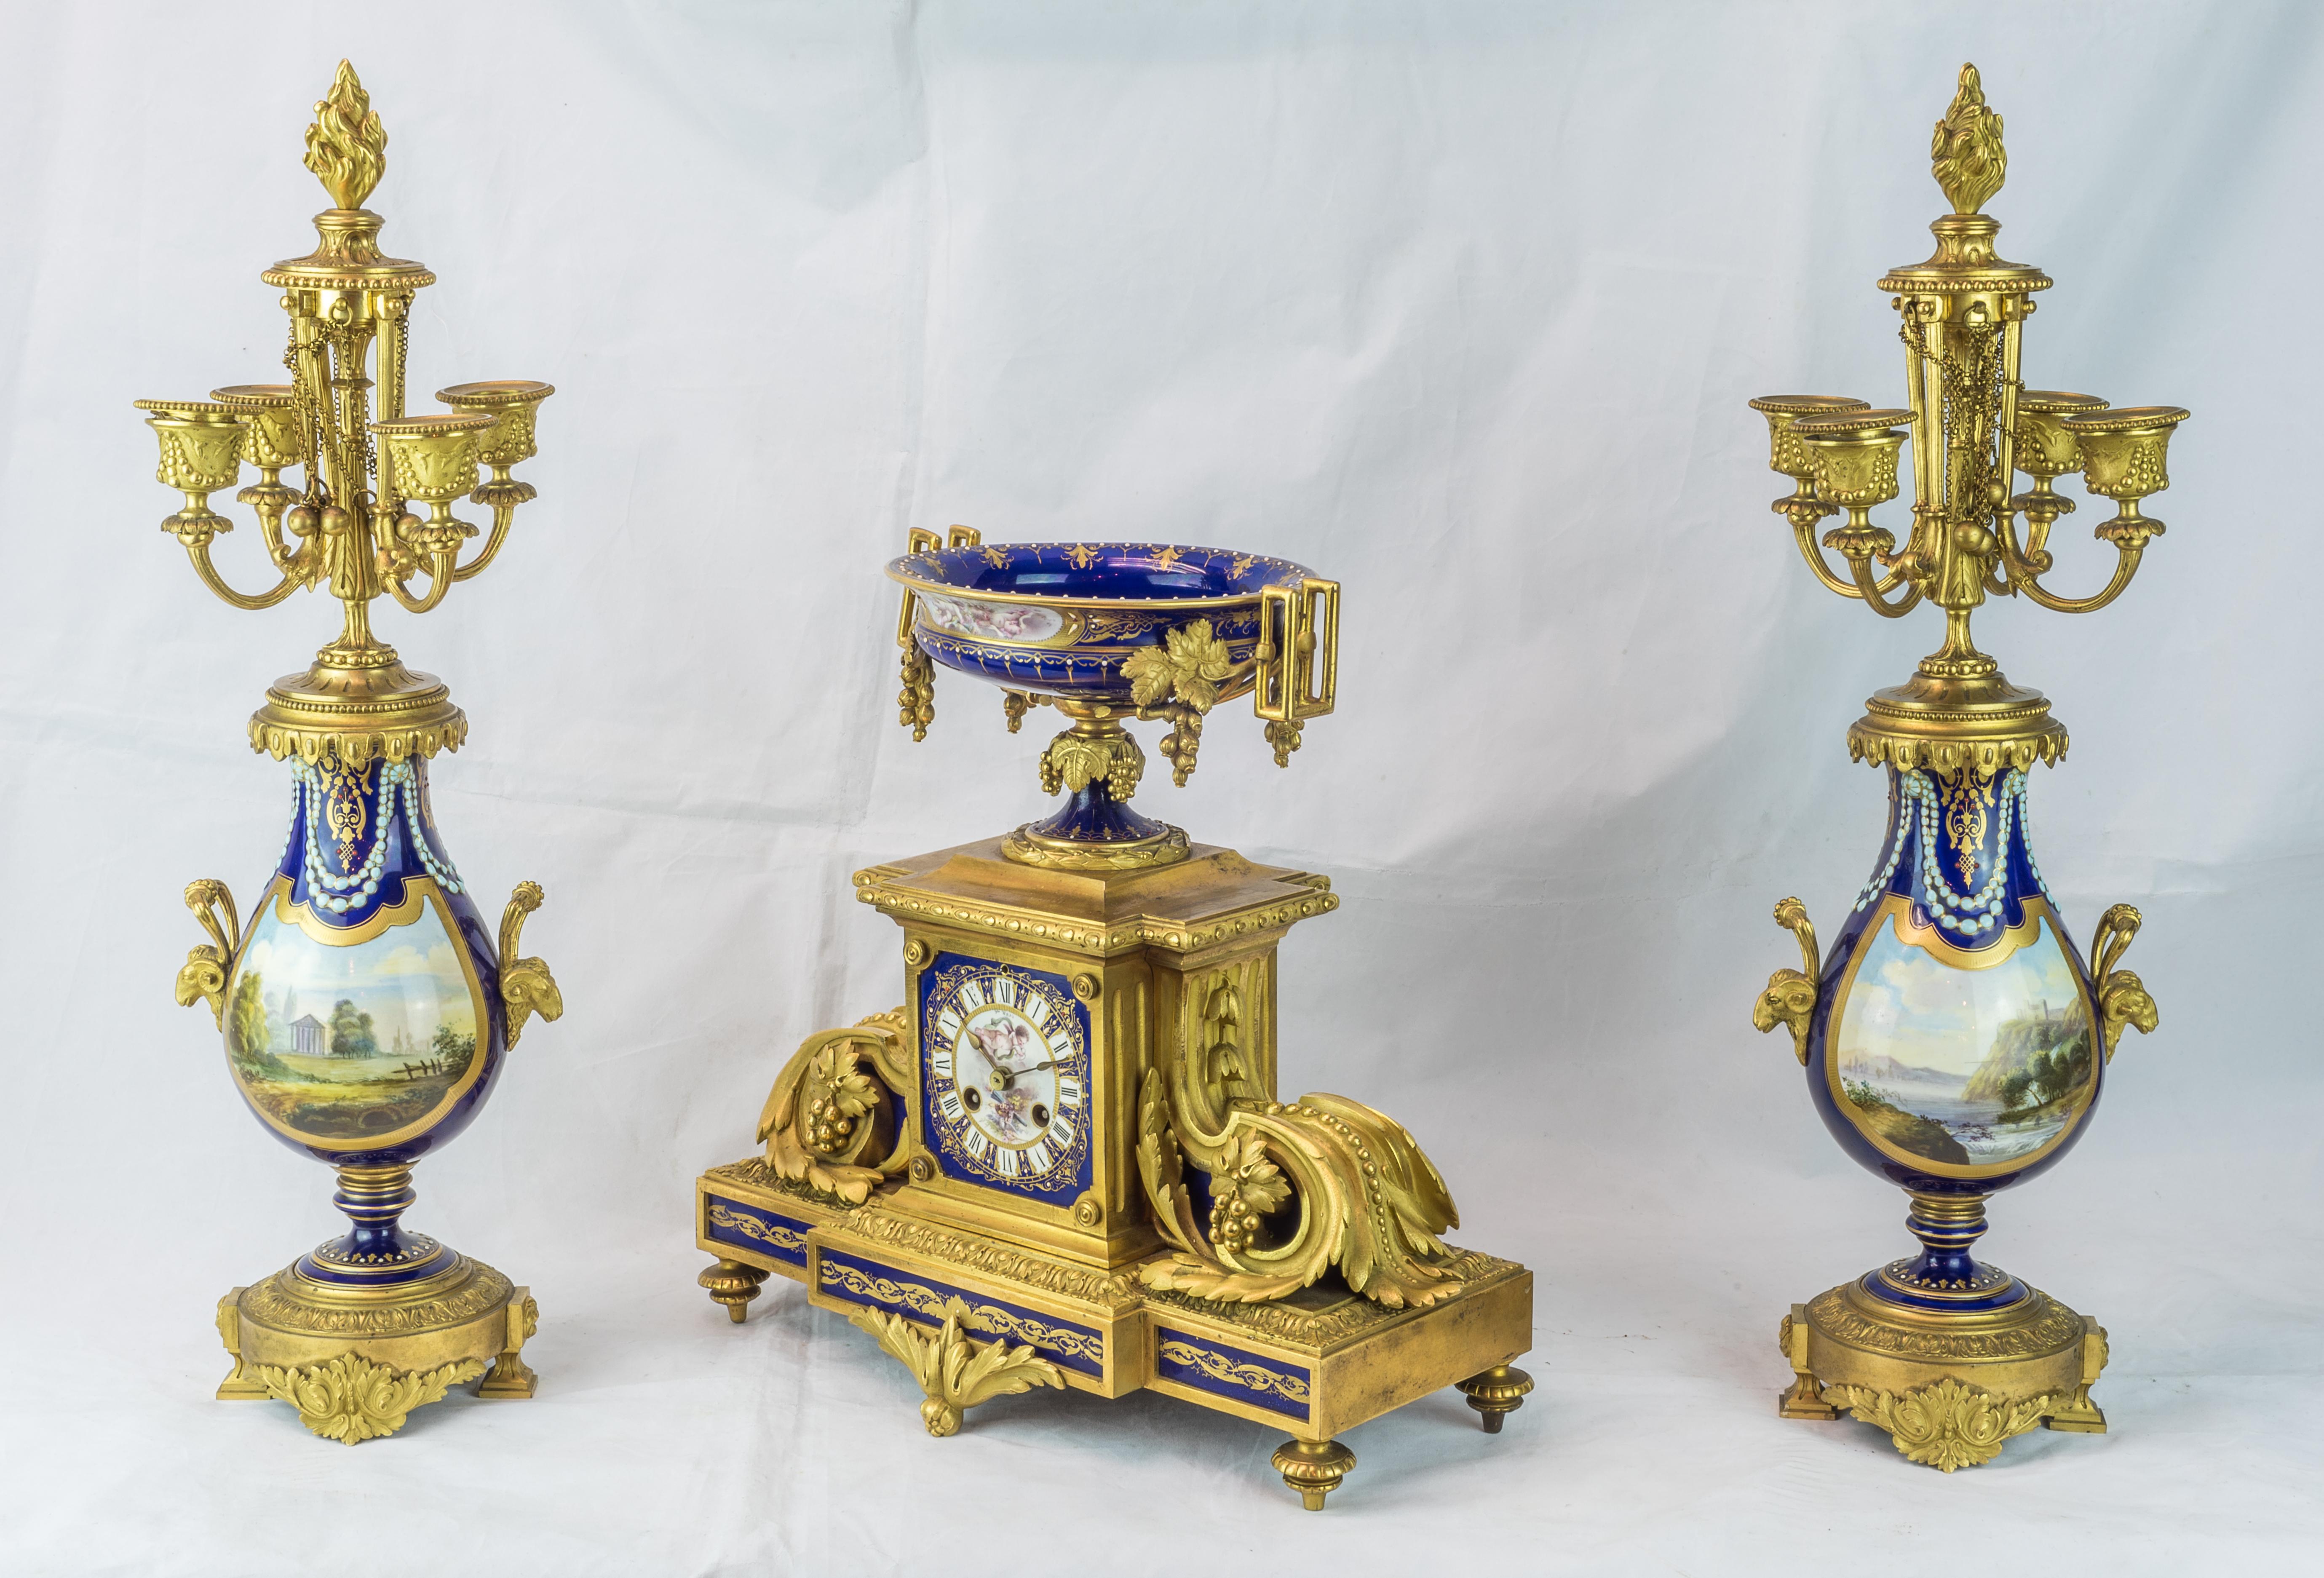 A magnificent Sèvres style gilt bronze and cobalt-blue 'Jeweled' painted porcelain clockset.
The central clock case surmounted by a ruby and pearl 'jeweled' coupe flanked by bracket handles; the vasi-form four-light candelabra with similar jewels